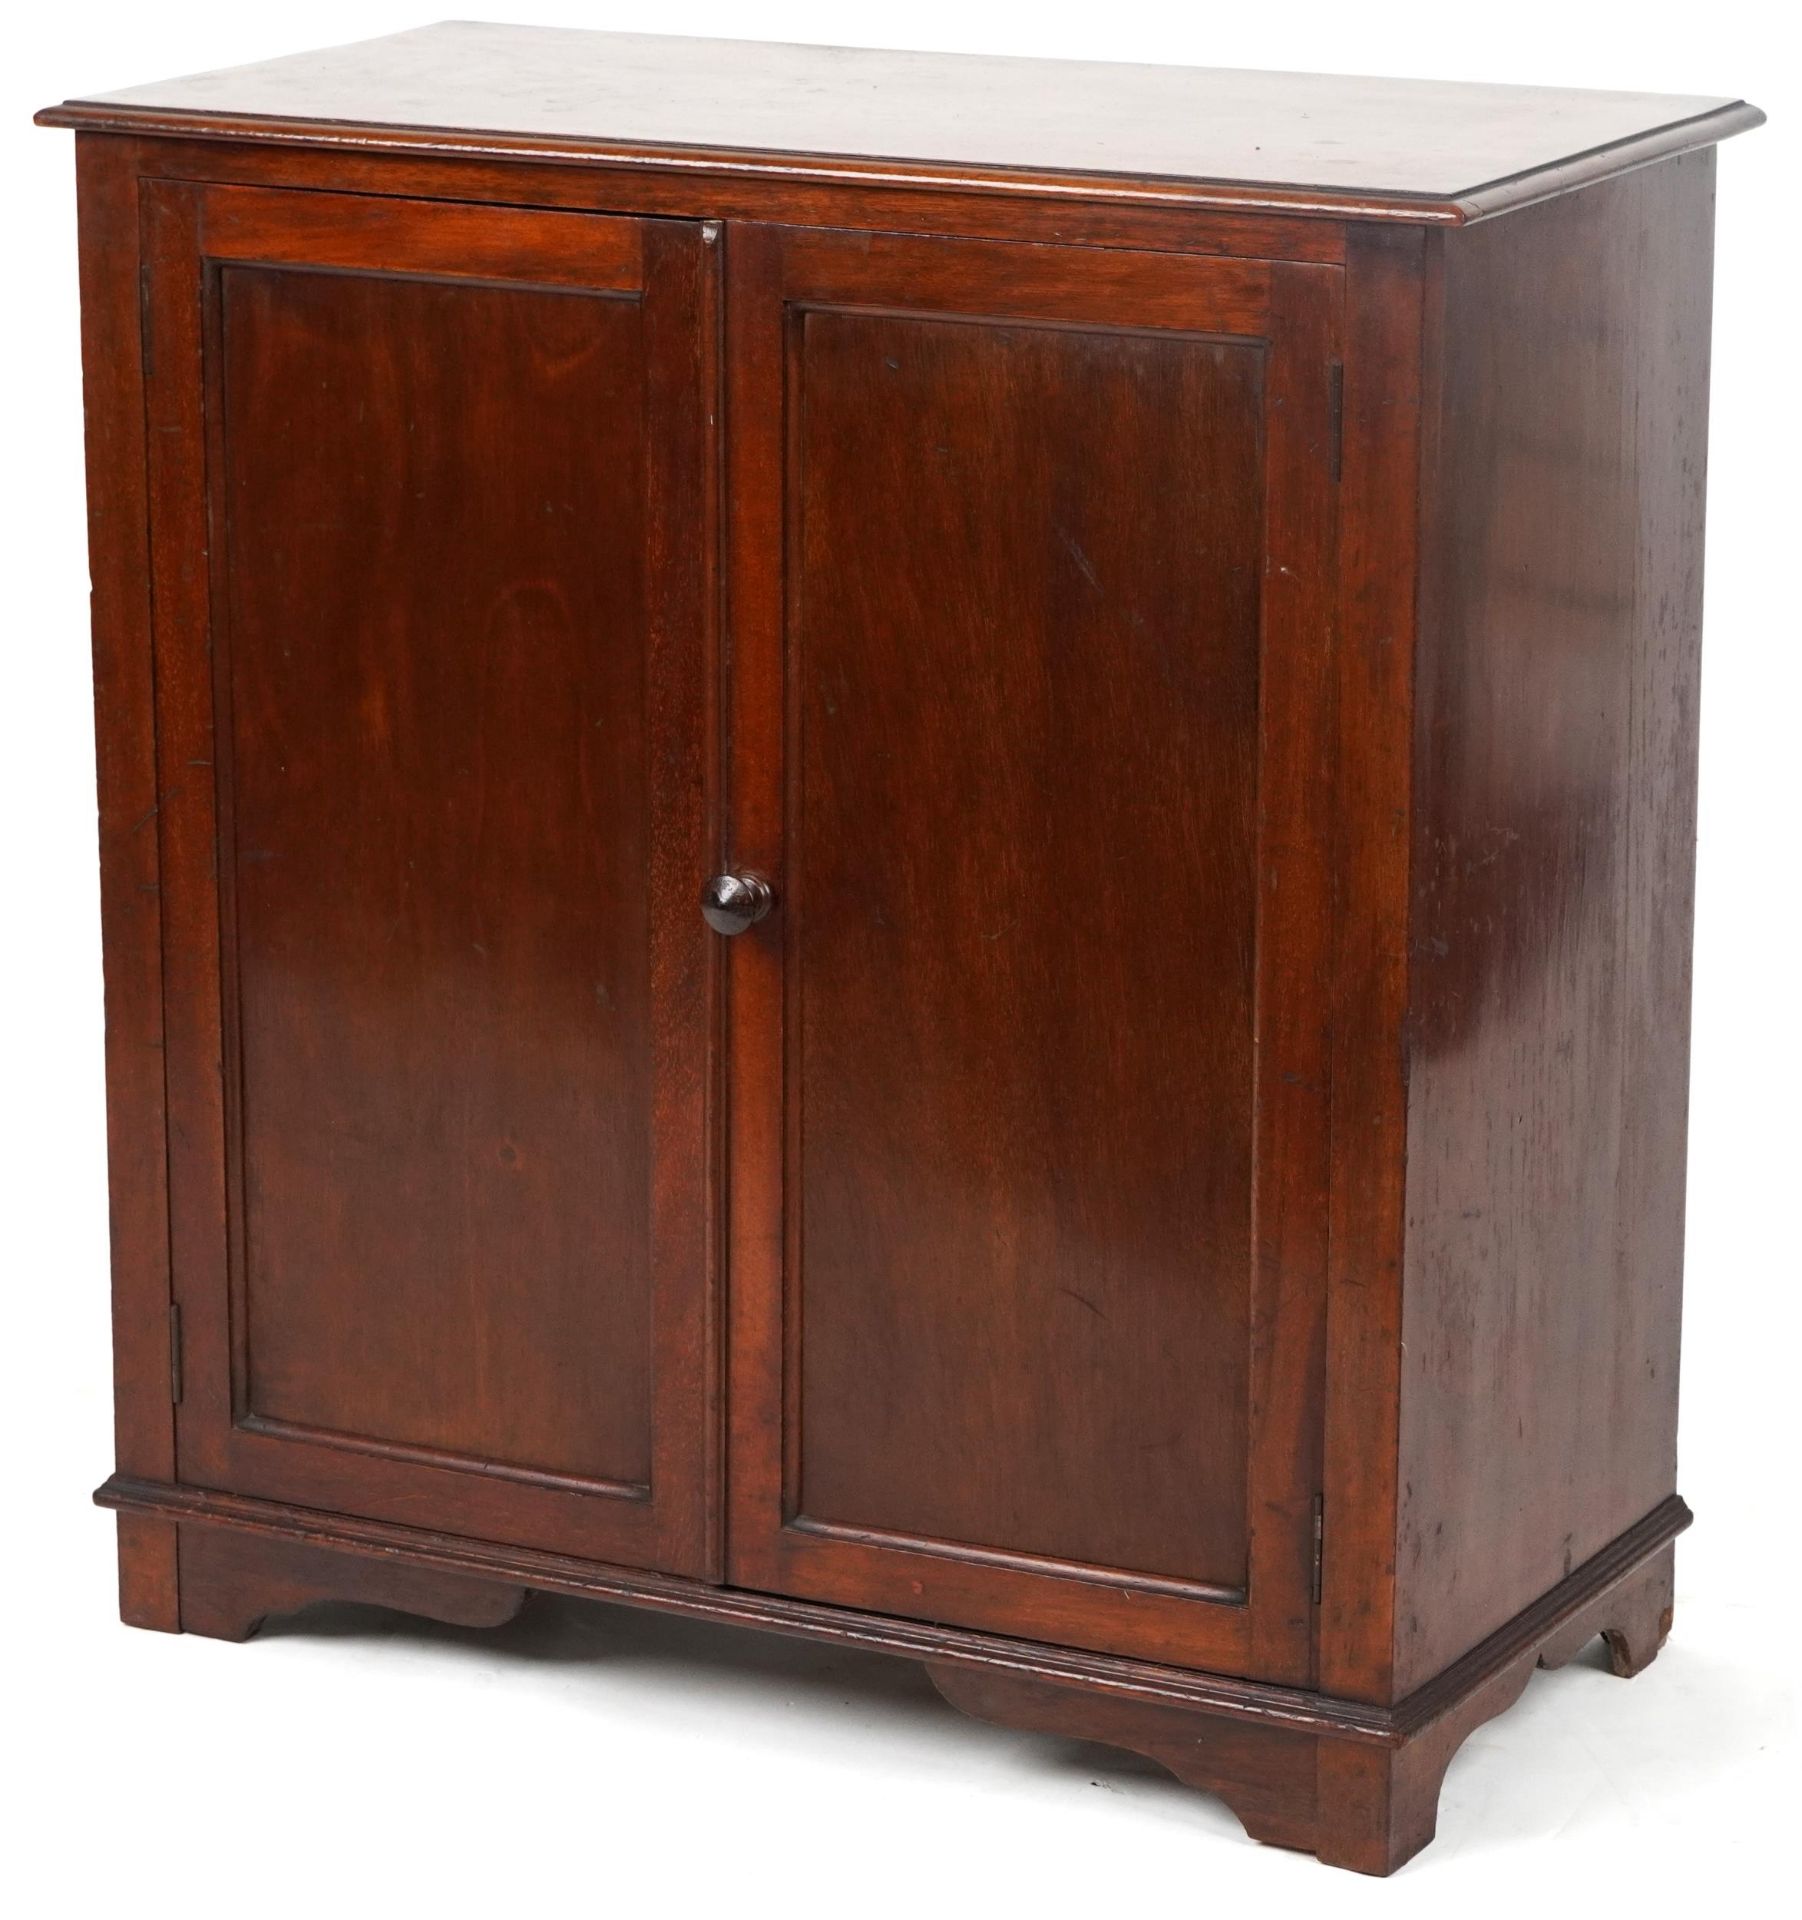 Aw-Lyn, mahogany two door cupboard enclosing three shelves, 78cm H x 75cm W x 36cm D : For further